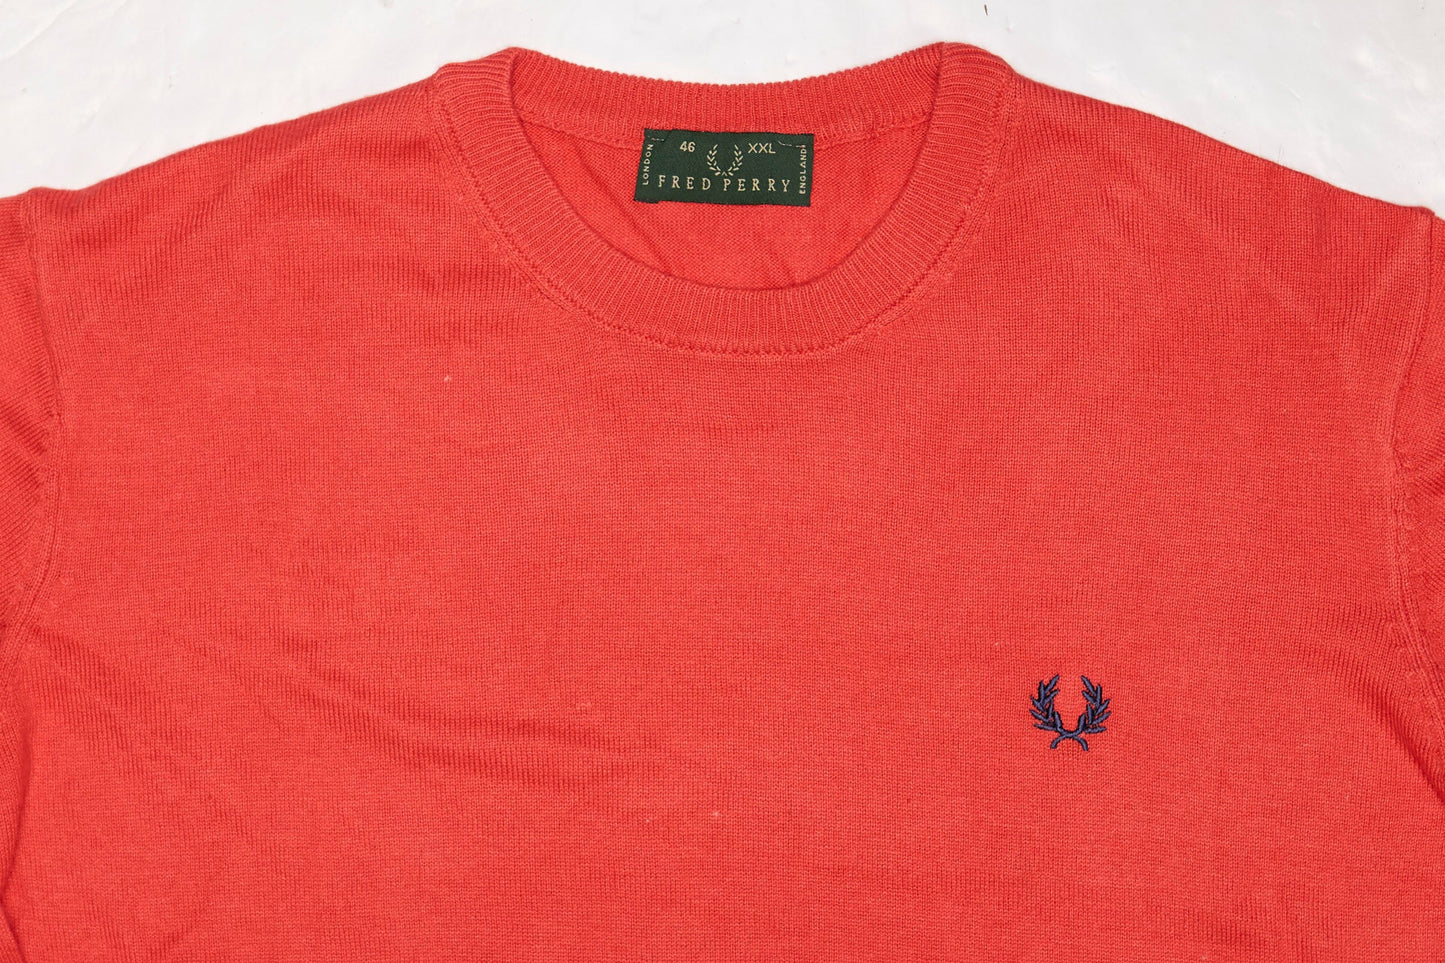 Mens Fred Perry Knitwear - XXL